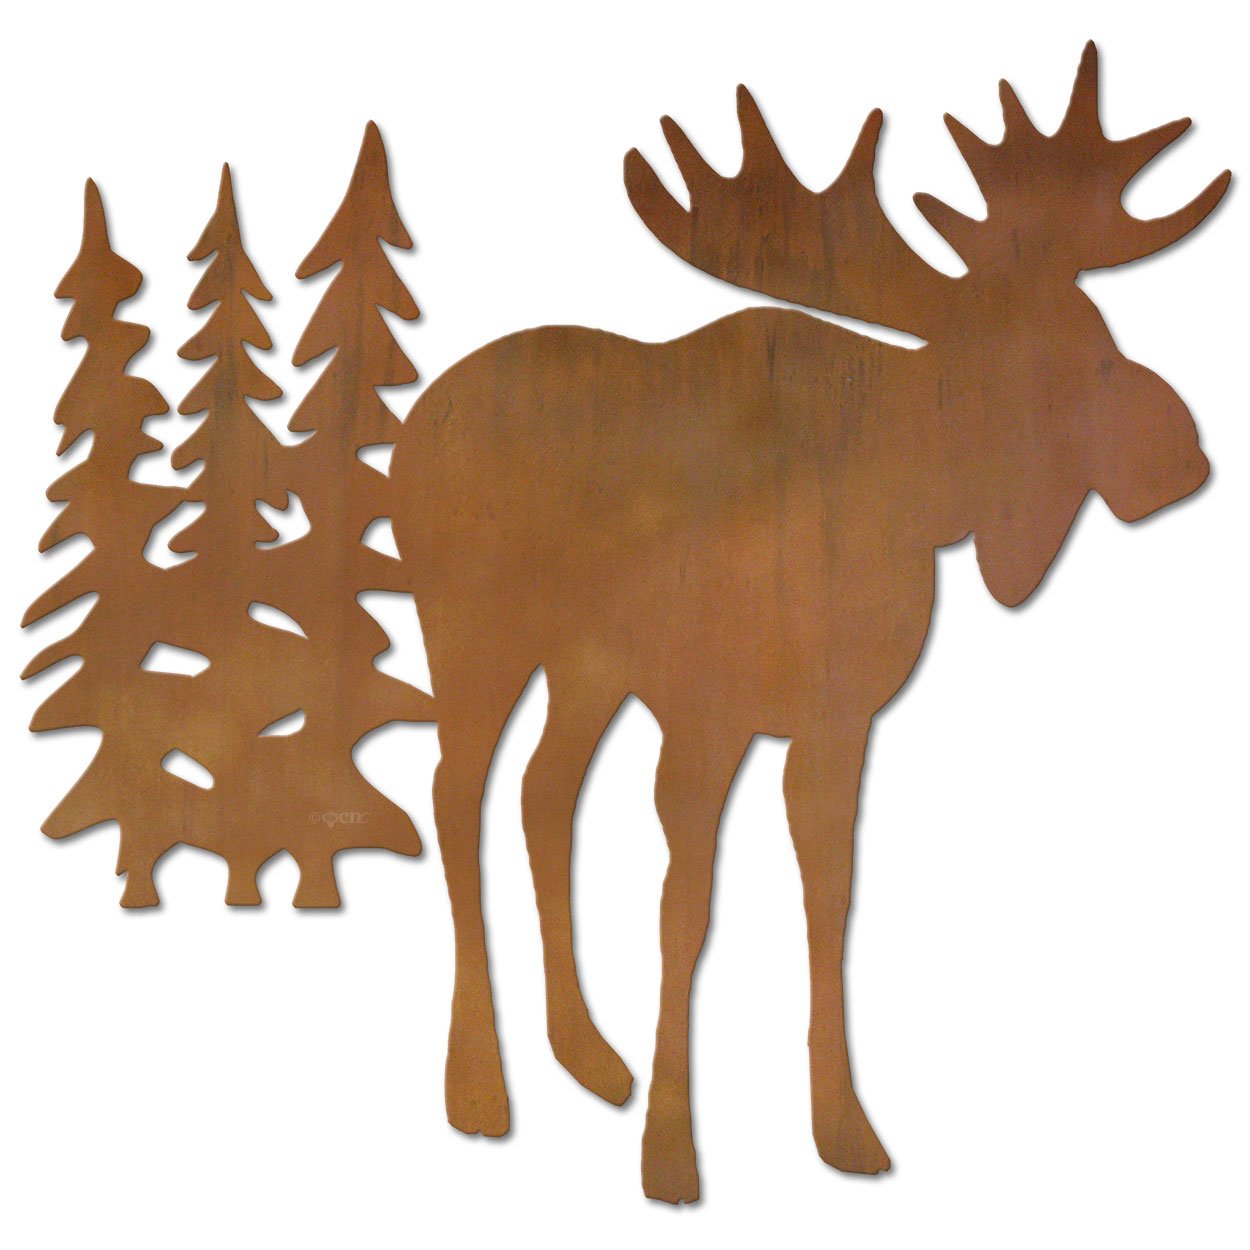 602035 - 44in Horizontal Moose and Trees XL Rustic Metal Wall Decor